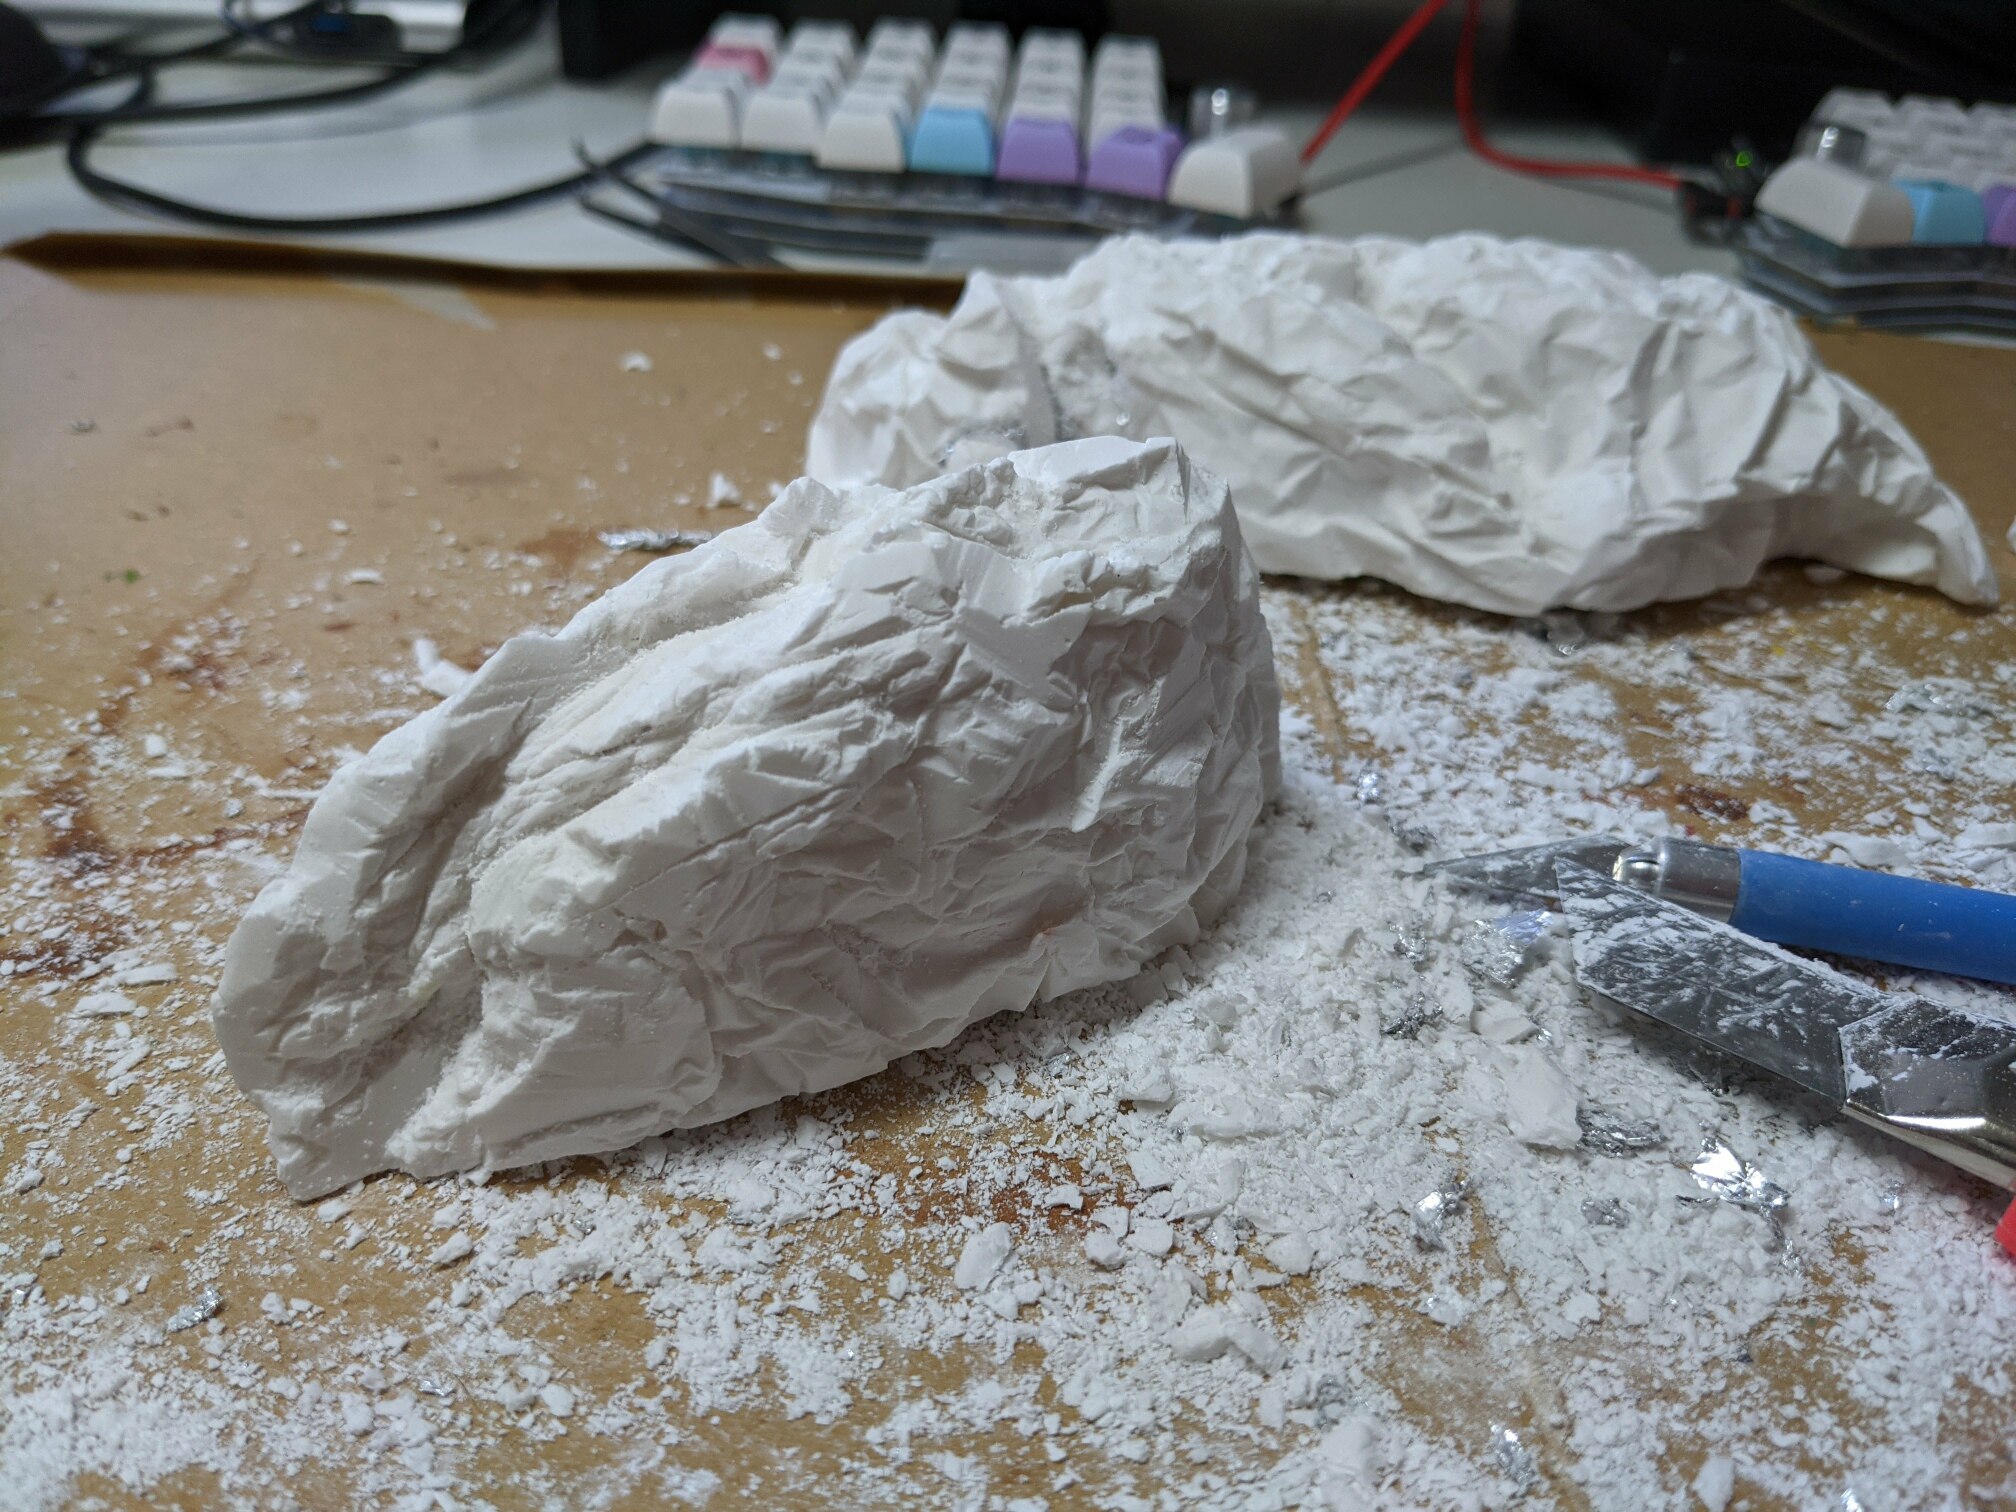 I learned the plaster sticks to aluminium foil quite well. It was tedious to remove it. I also spent some time improving the result with a knife.